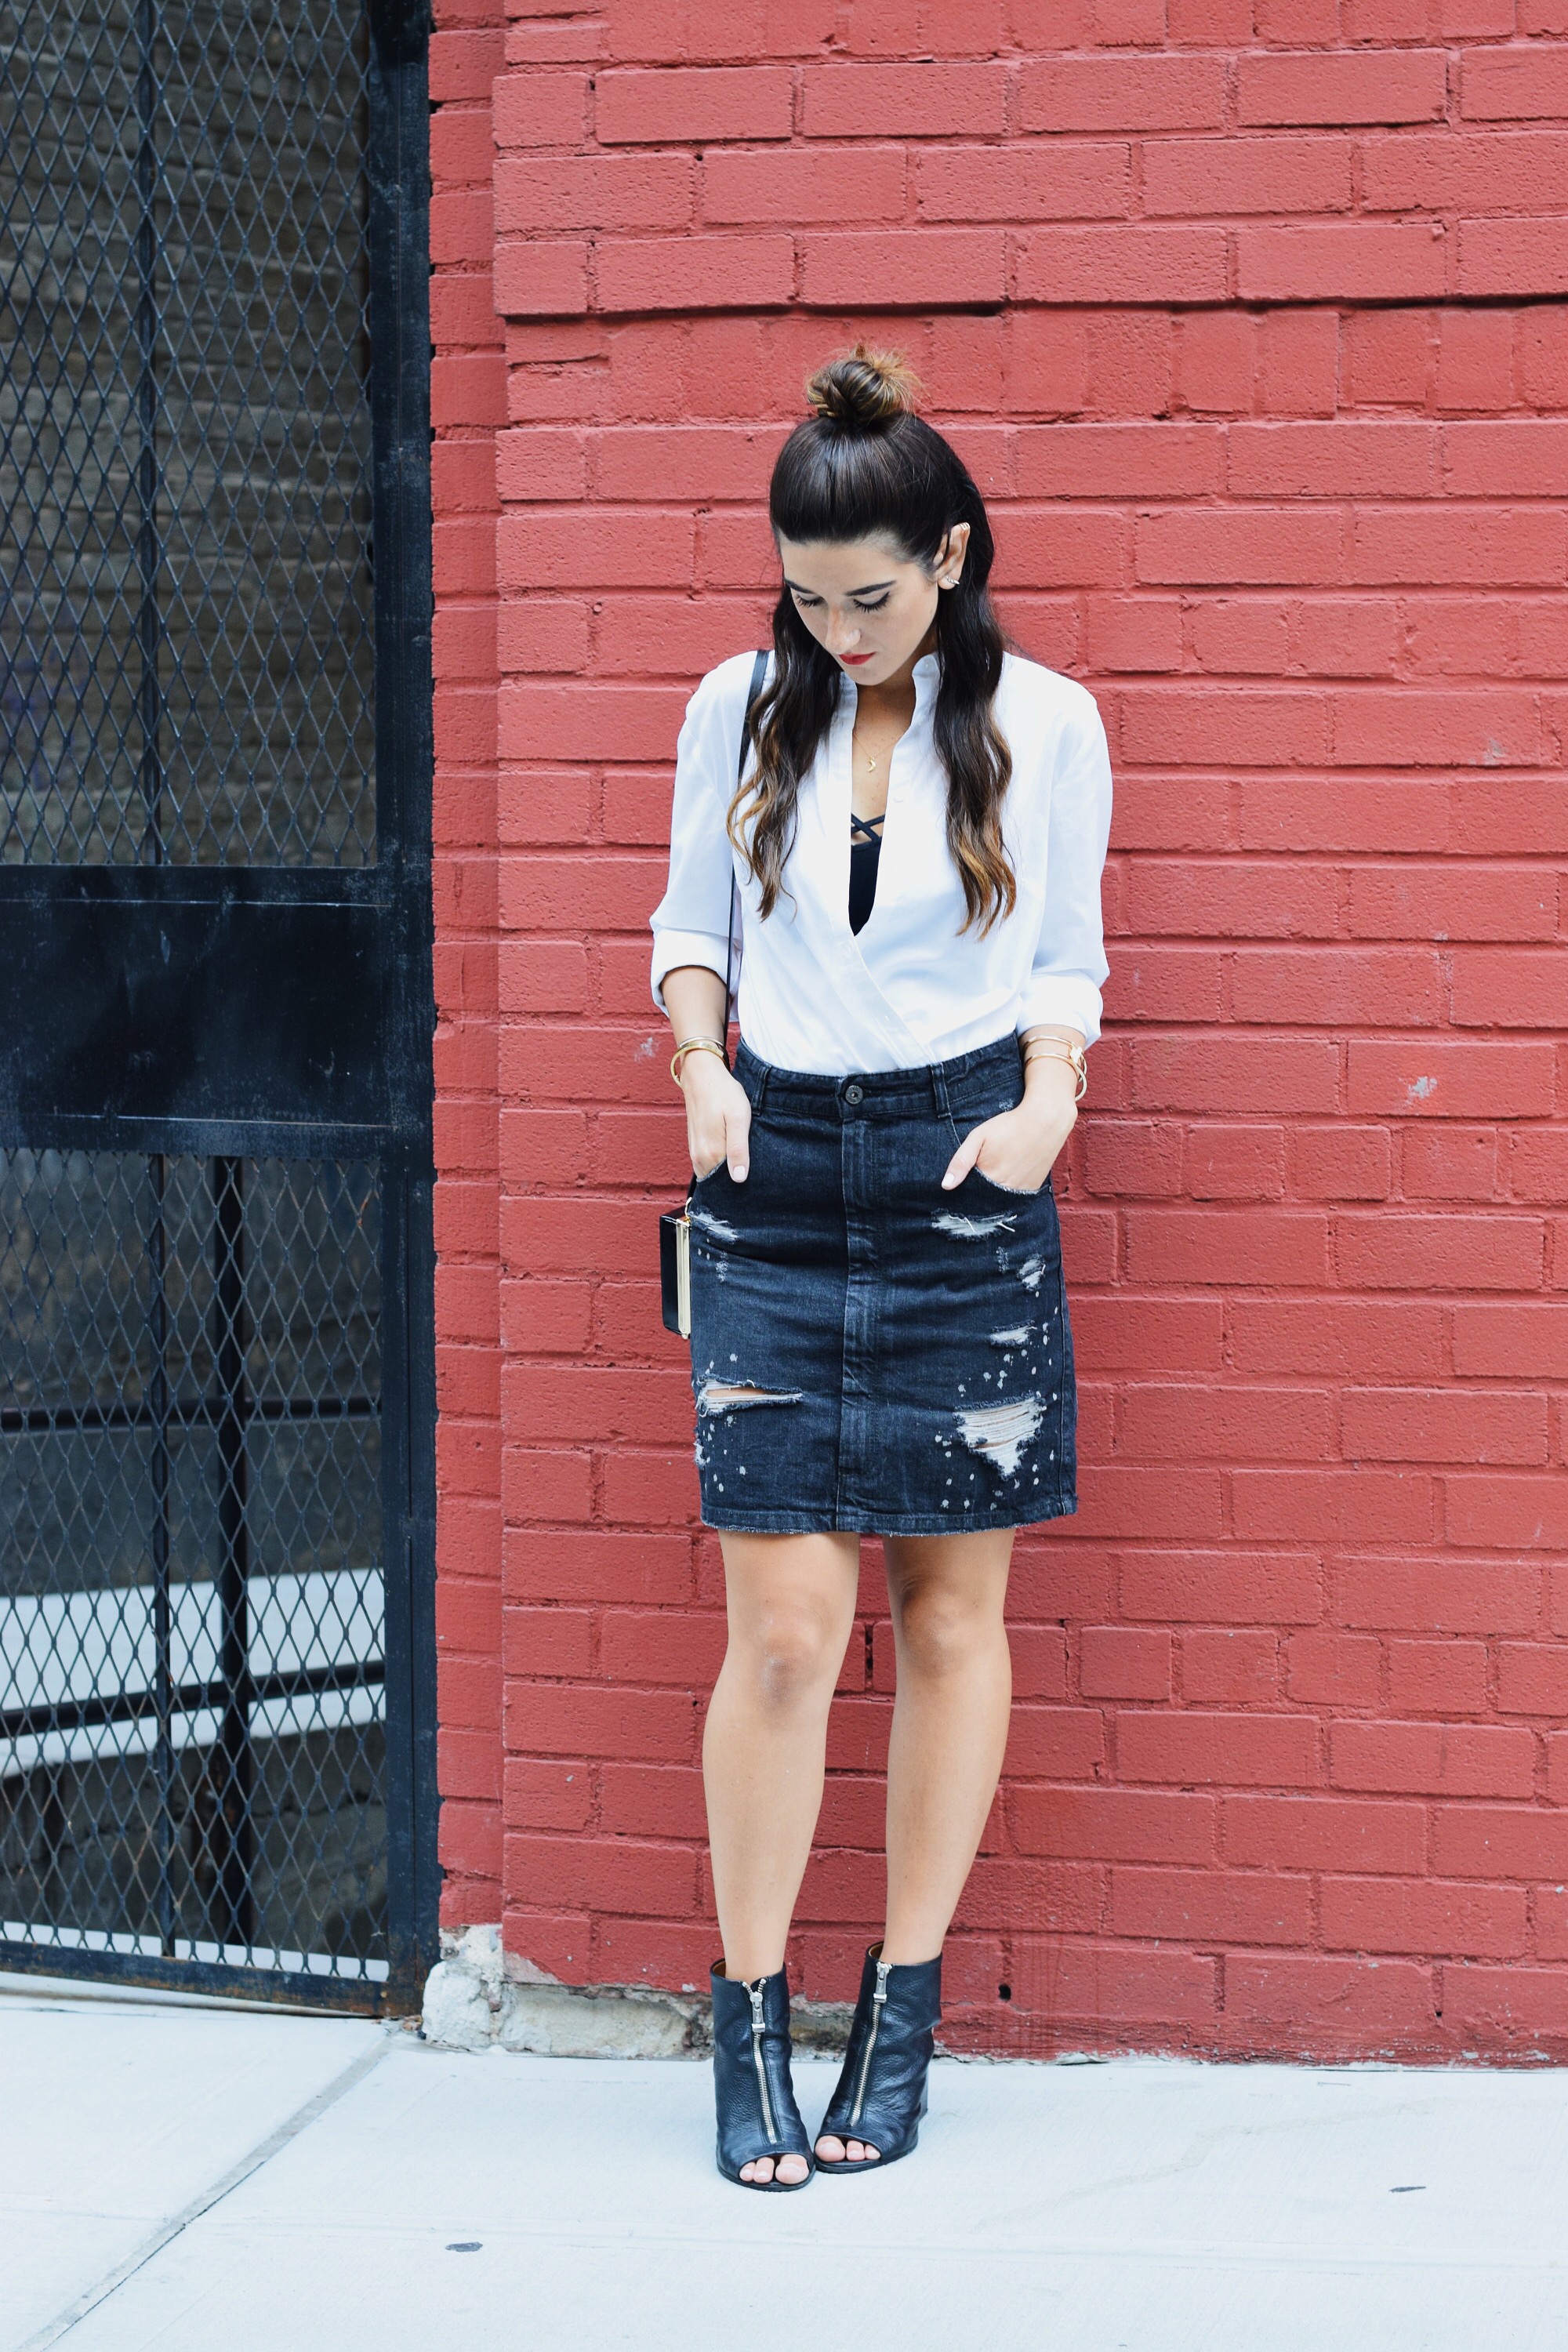 Coco & Marie Moon Necklace Giveaway Louboutins & Love Fashion Blog Esther Santer NYC Street Style Blogger Lifestyle Topknot Bun Ripped Jean Skirt Denim Zara Button Down Zara Black Clutch Bag Bralette Nordstrom Booties Girl Women Gold Jewelry Outfit.JPG